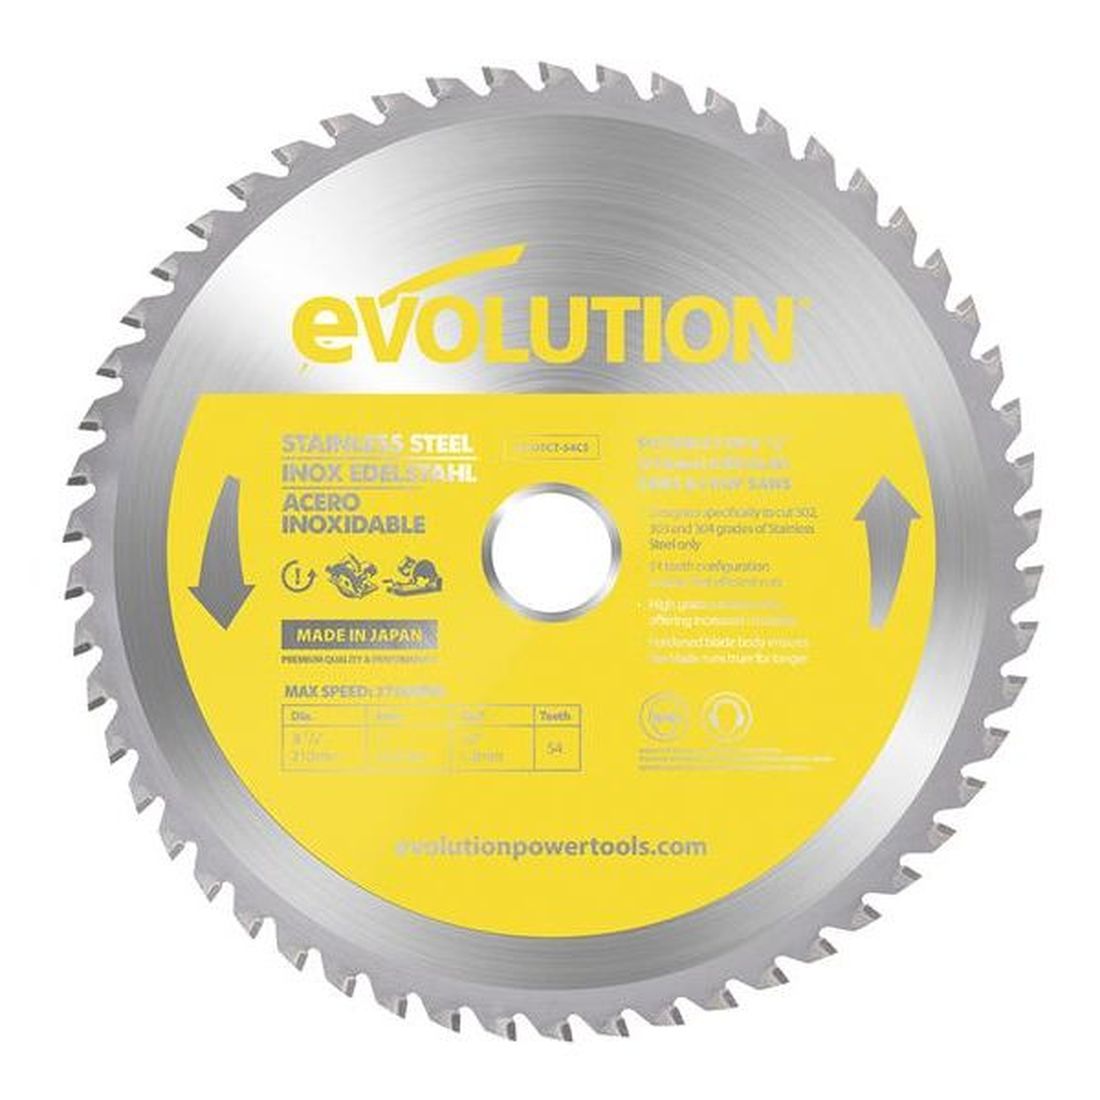 Evolution Stainless Steel Cutting Circular Saw Blade 210 x 25.4mm x 54T                   